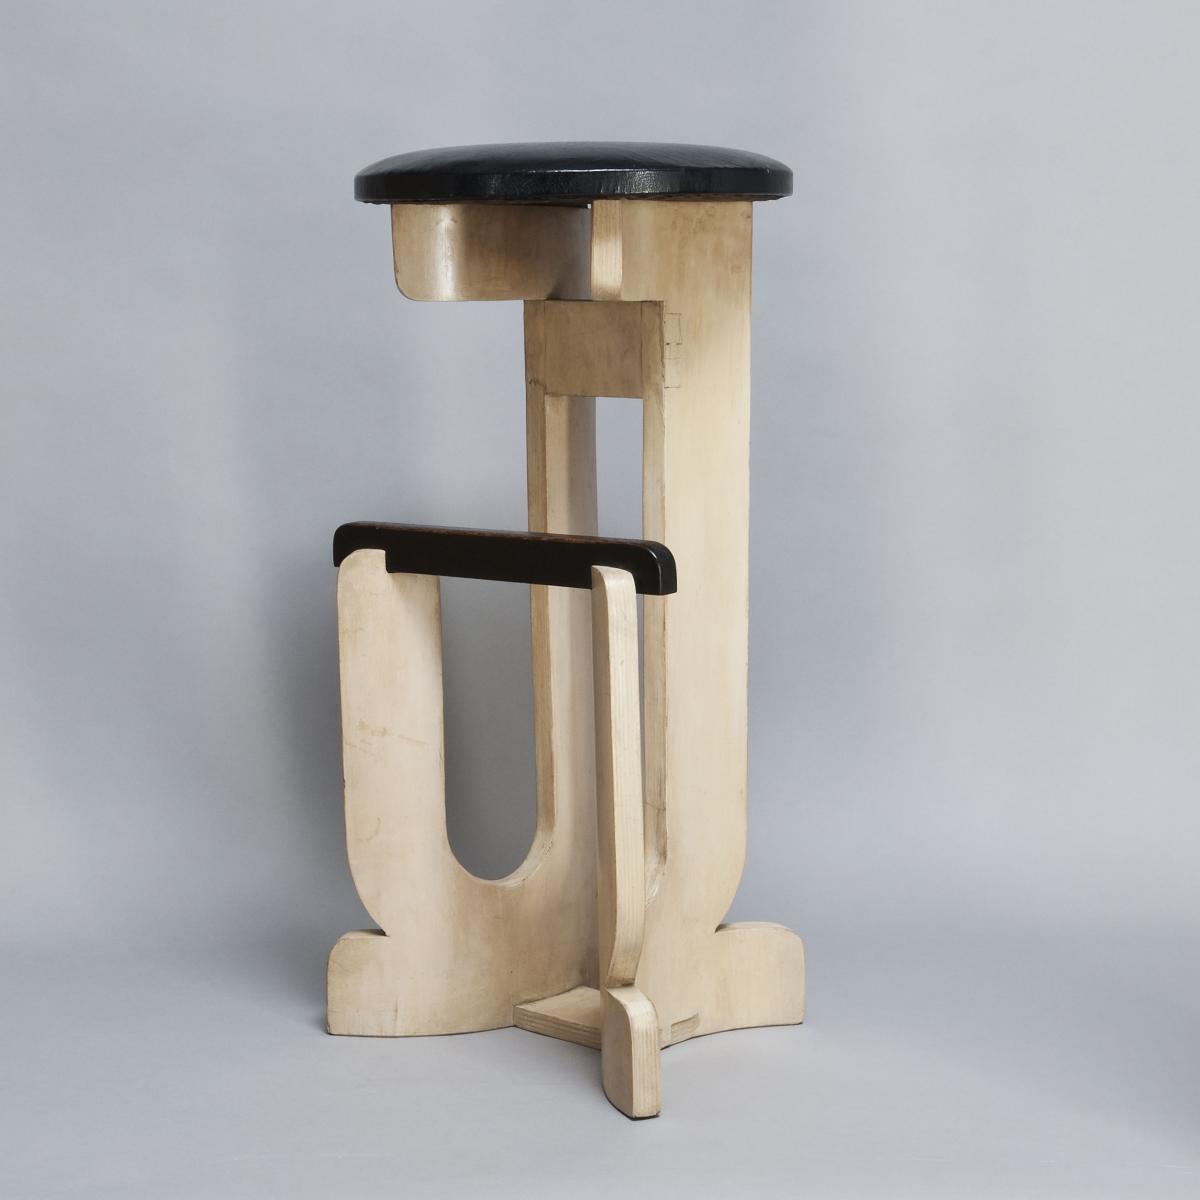 Gerald Summers Cocktail Stool - Made by Makers of Simple Furniture (1931-1940)